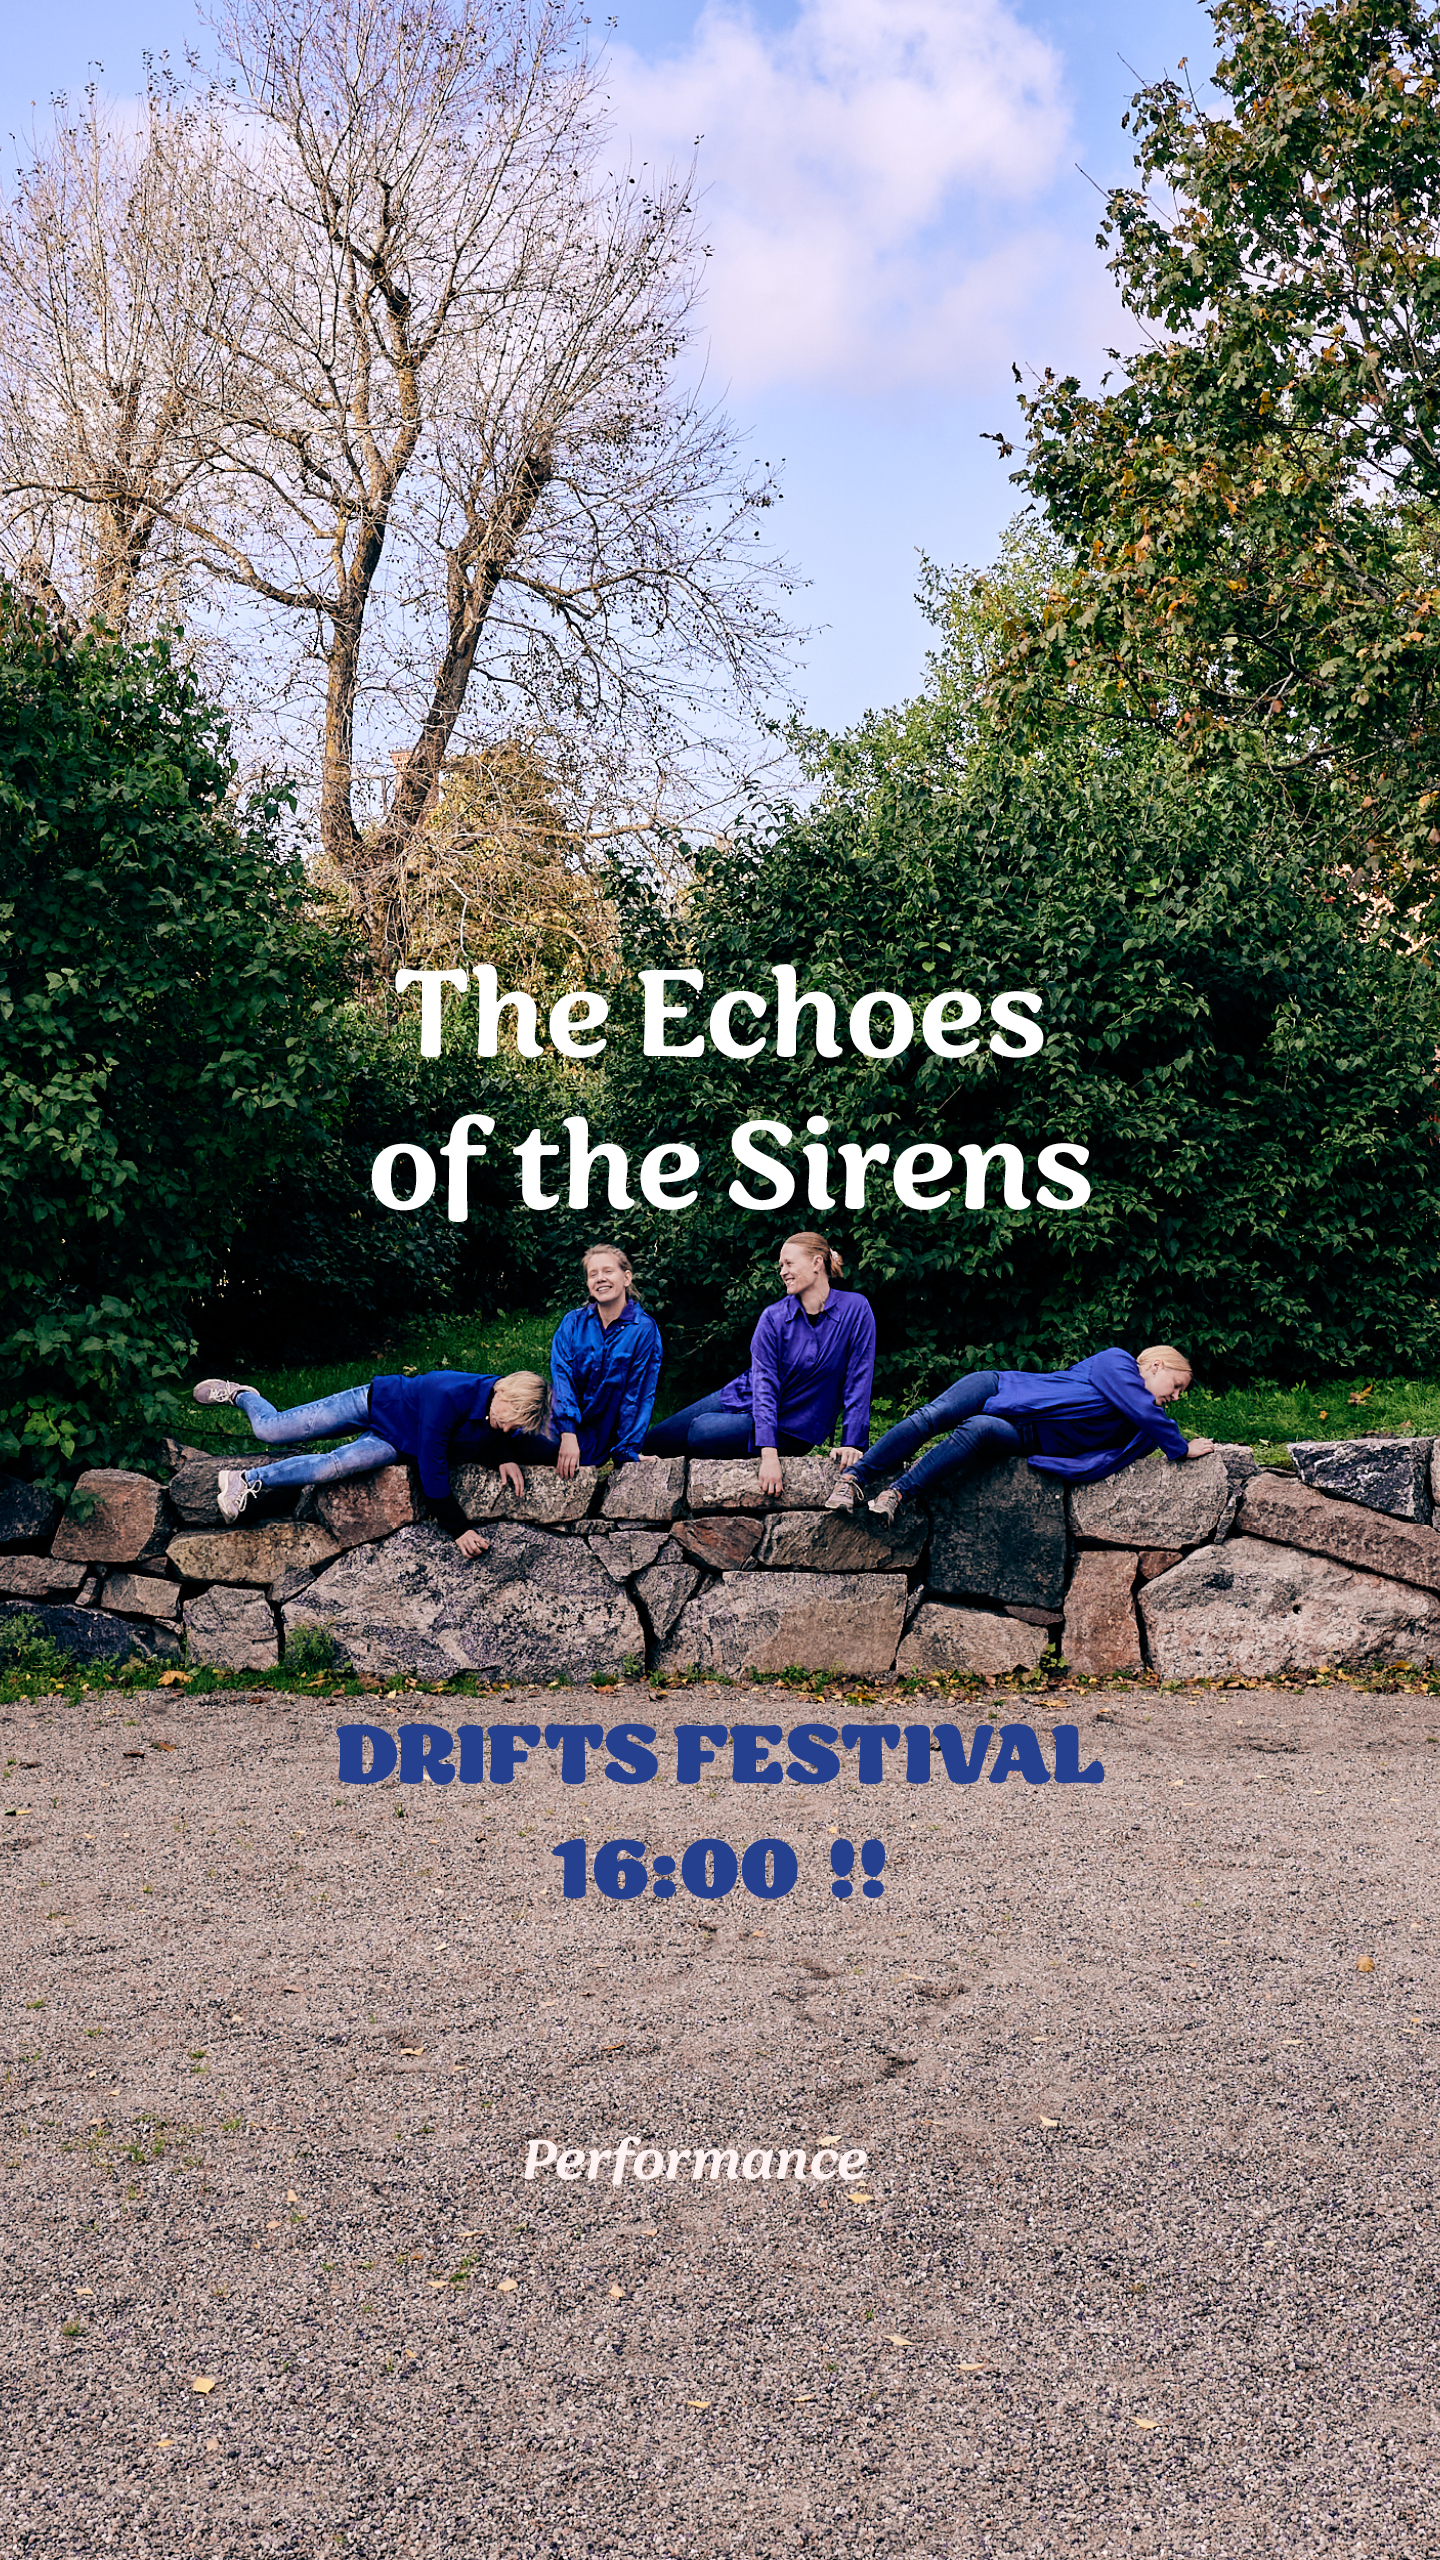 The Echoes of the Sirens at Drifts Festival Helsinki